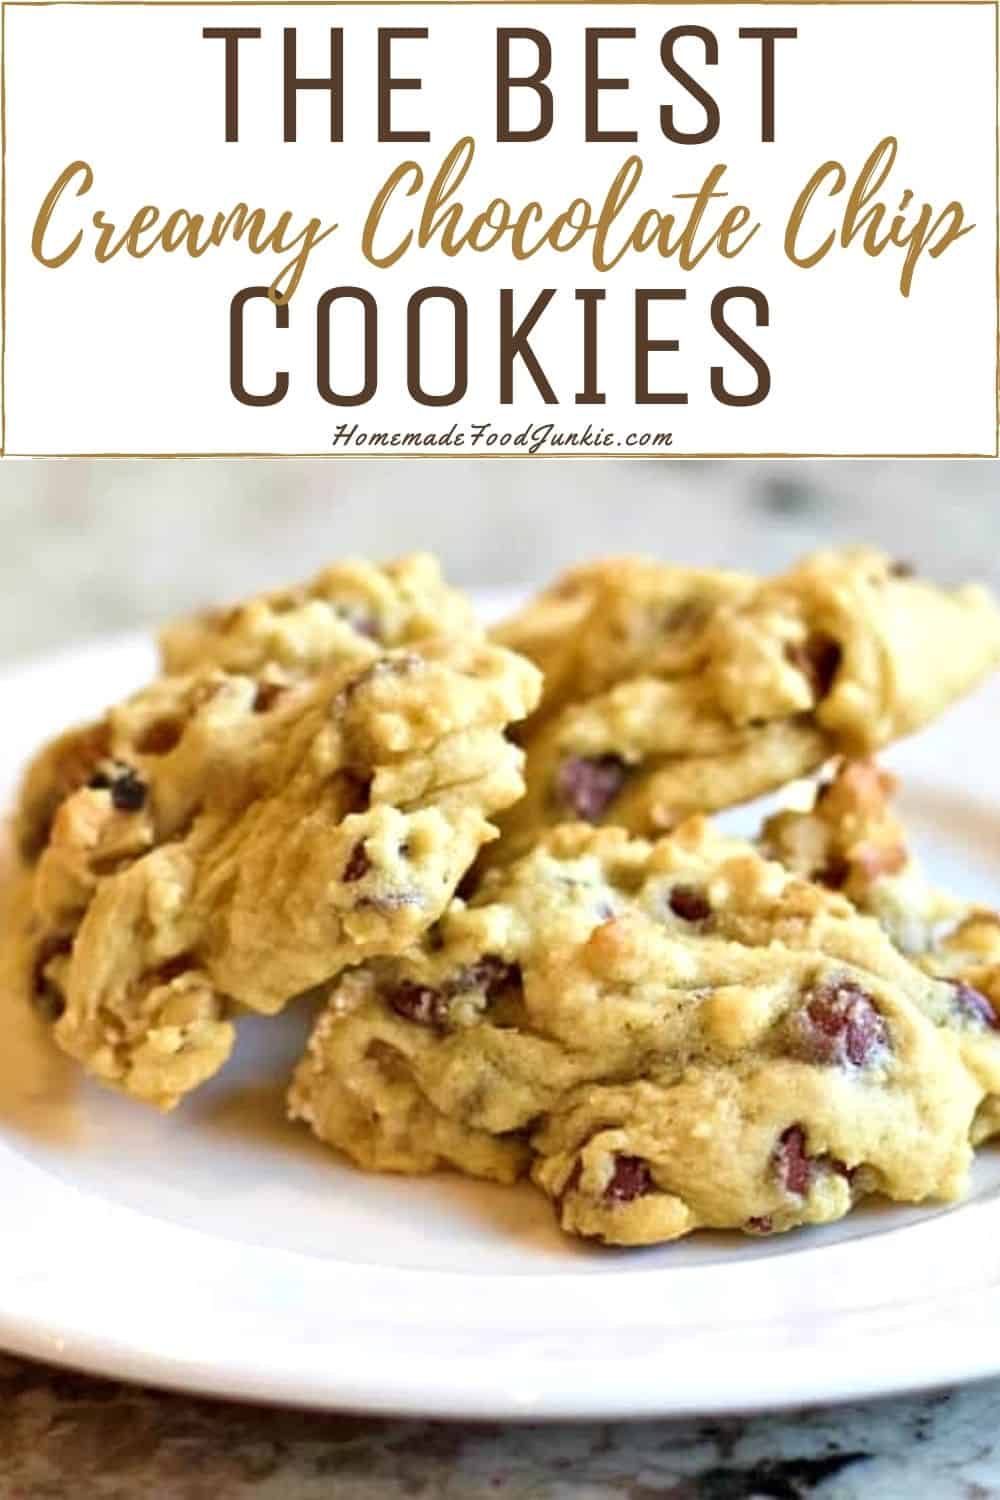 The Best Creamy Chocolate Chip Cookies-Pin Image